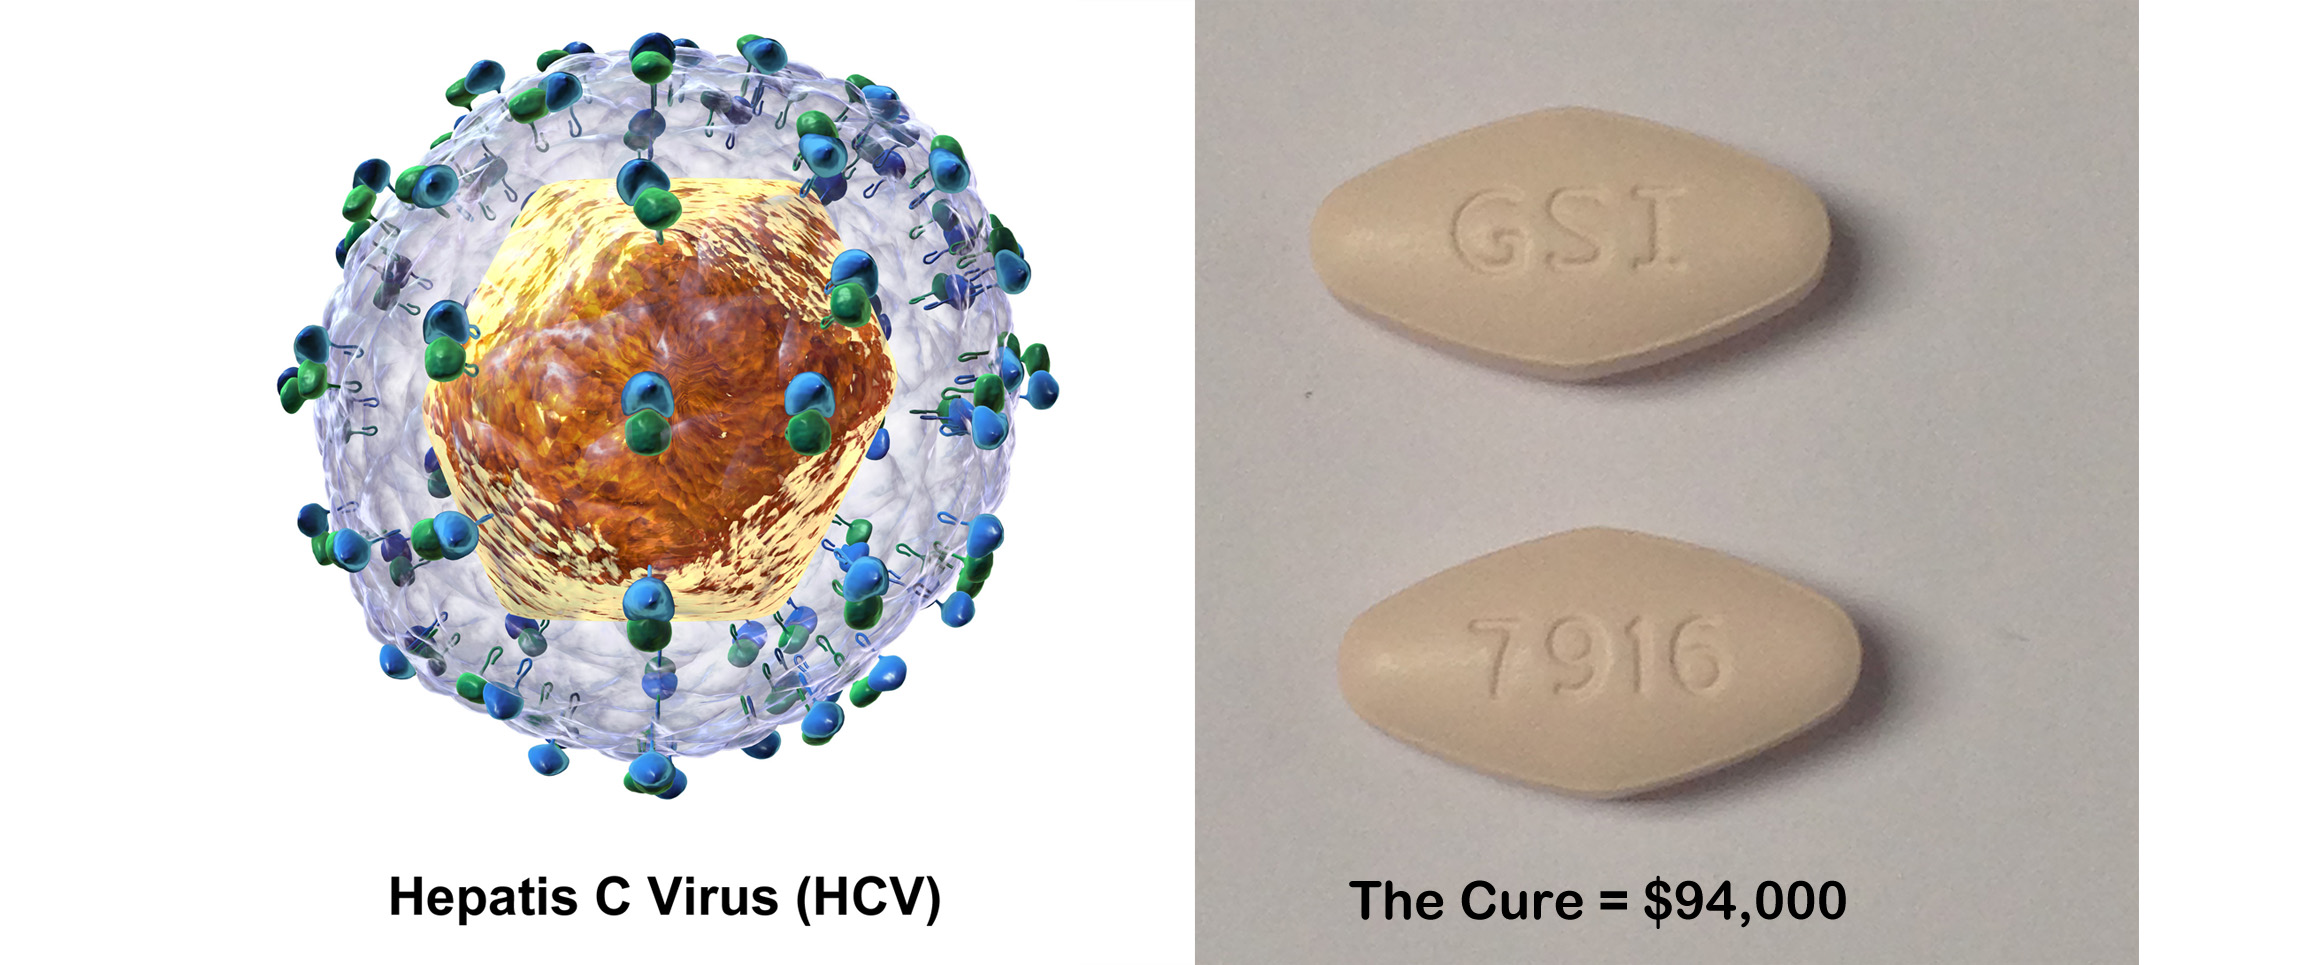 HCV image by Bruce Blaus (Own work) [CC BY-SA 4.0], via Wikimedia Commons; The Cure image by Richard Kontas